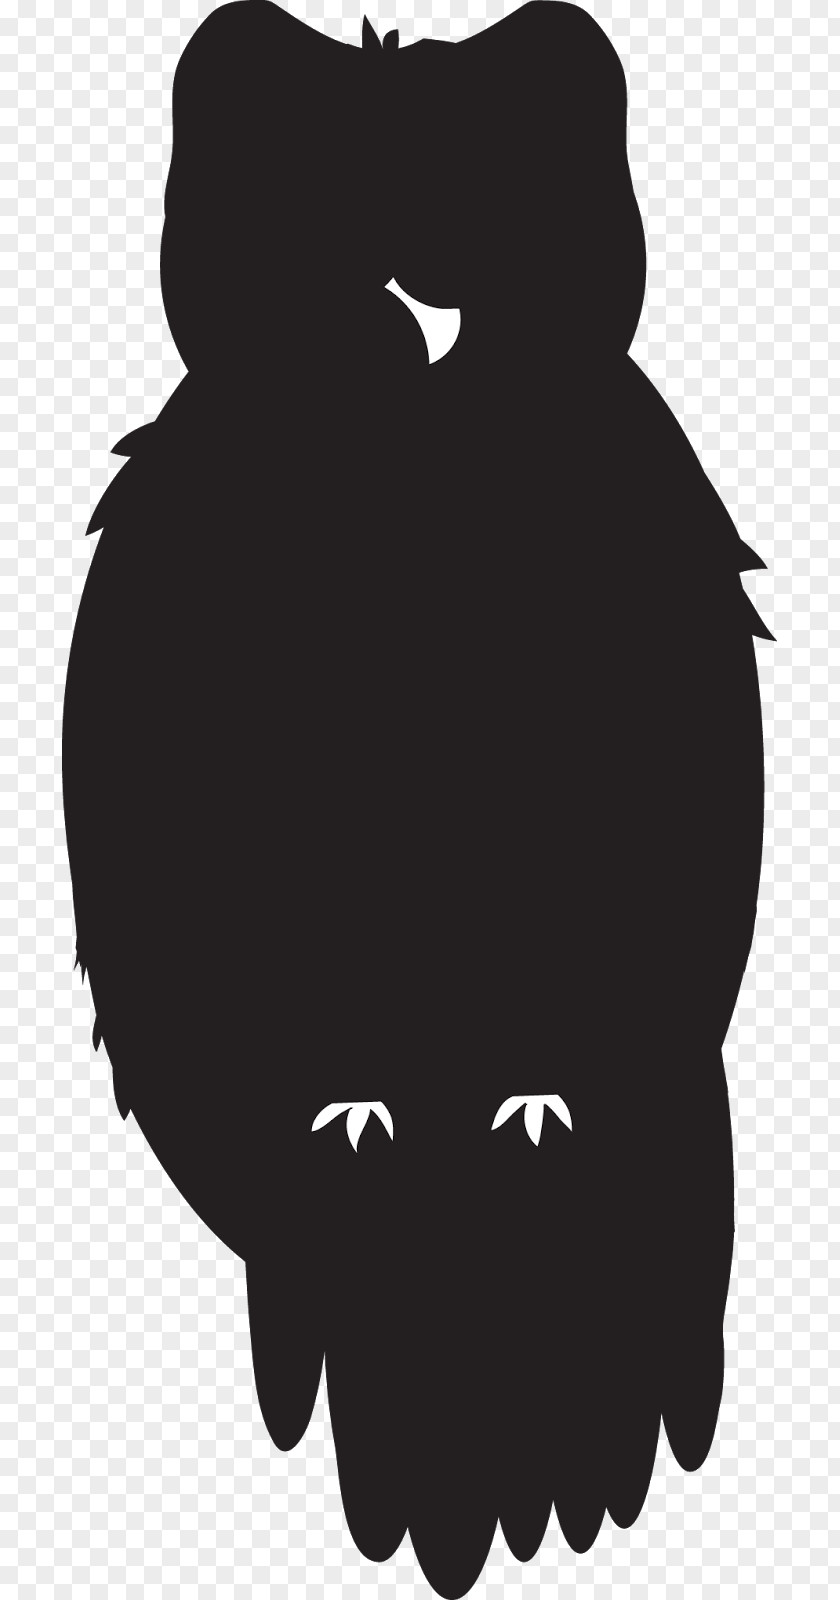 Kd Logo Clip Art Black Carnivores Silhouette Character PNG